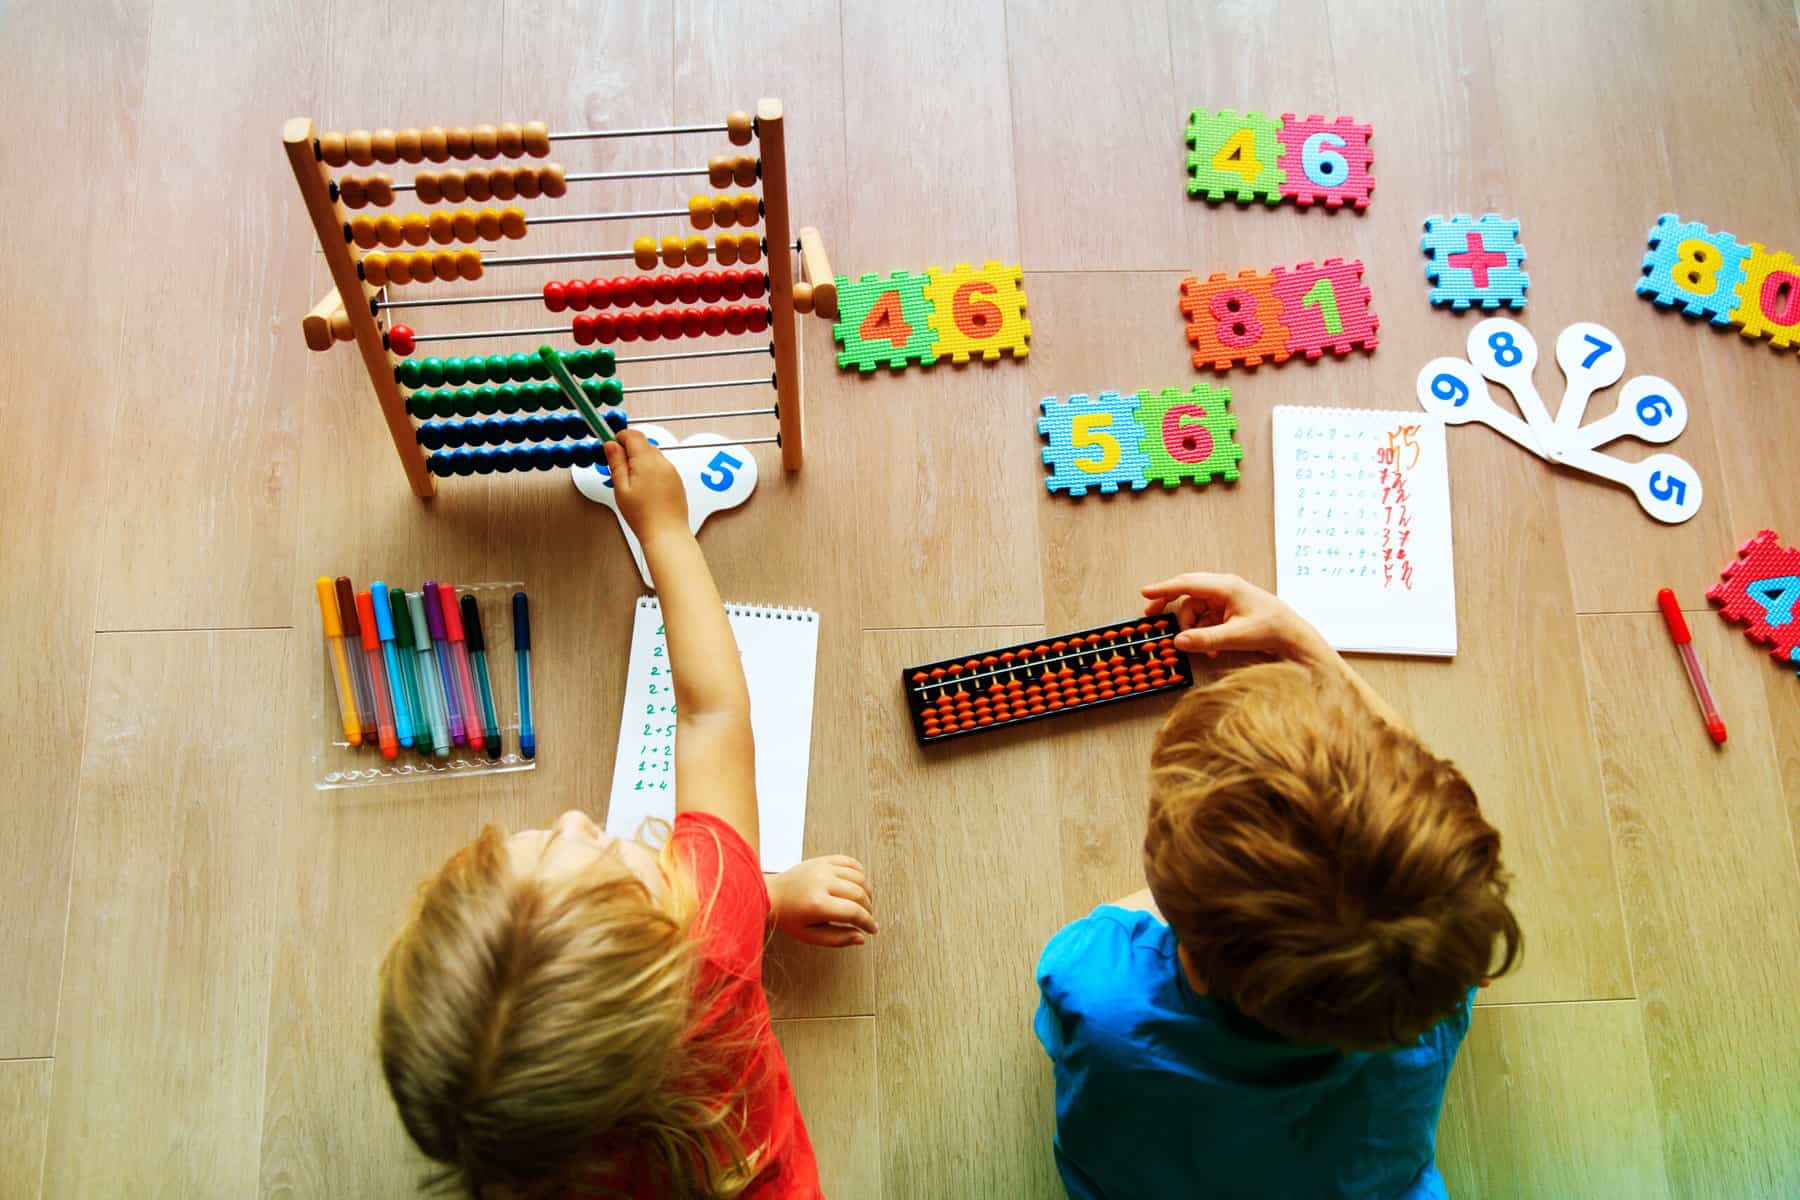 Kids playing with math toys